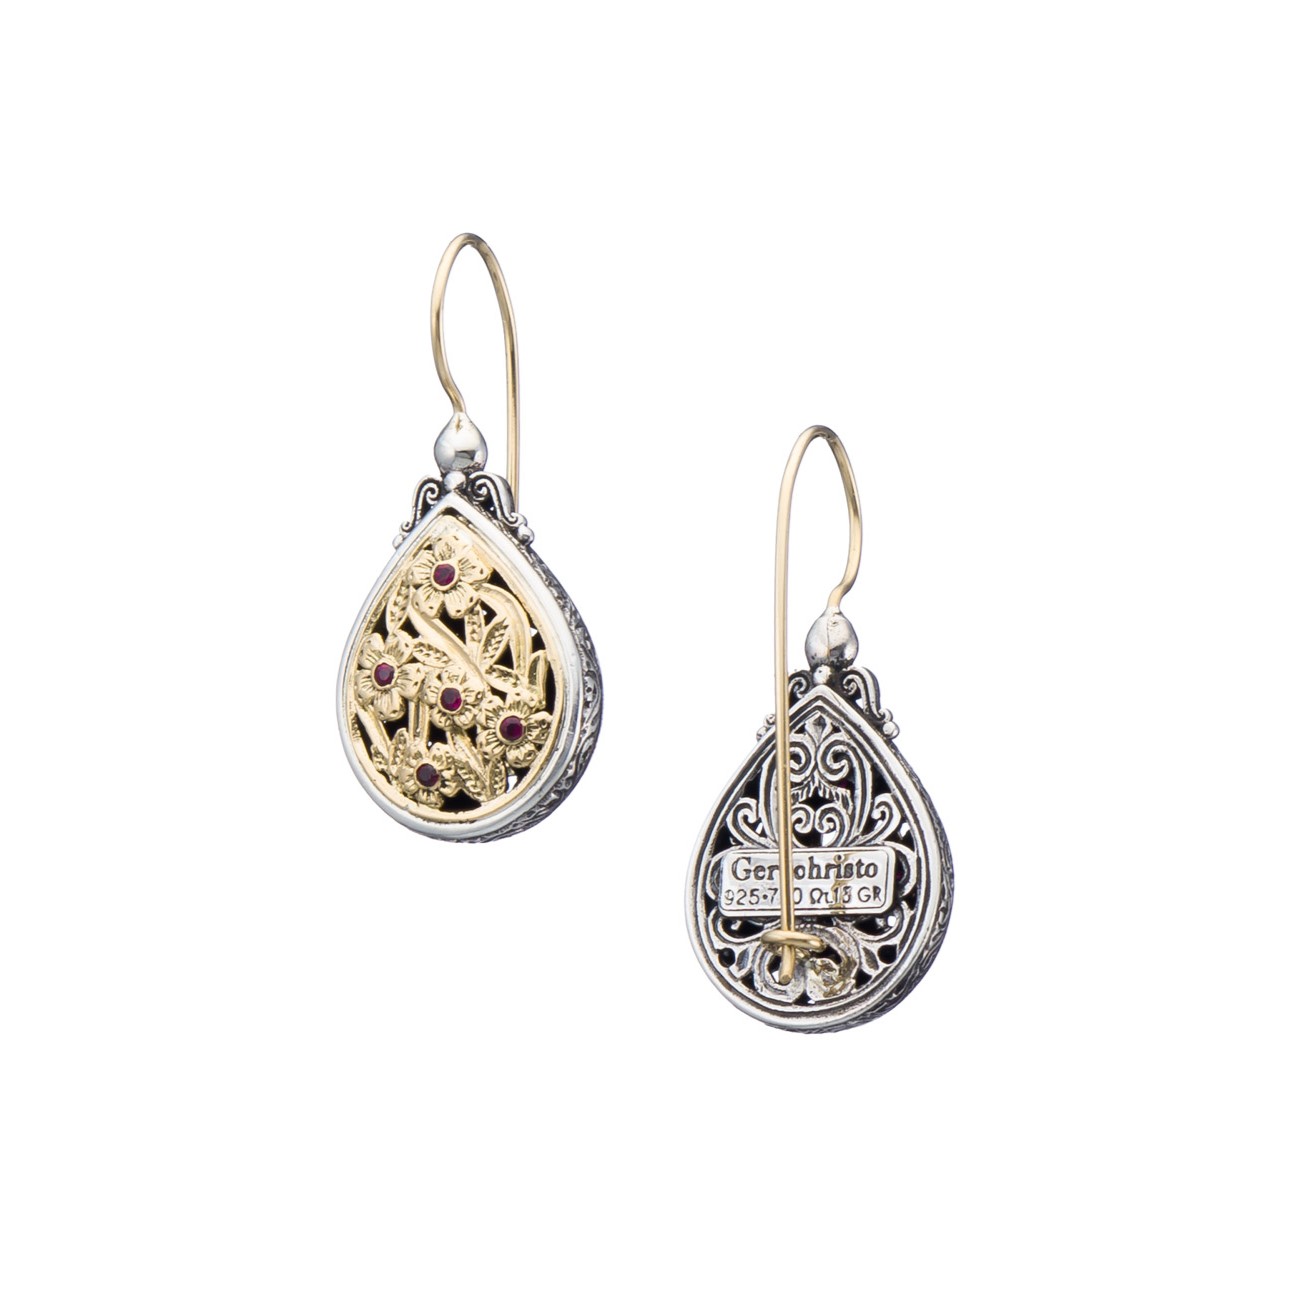 Harmony drop earrings in 18K Gold and sterling silver with rubies